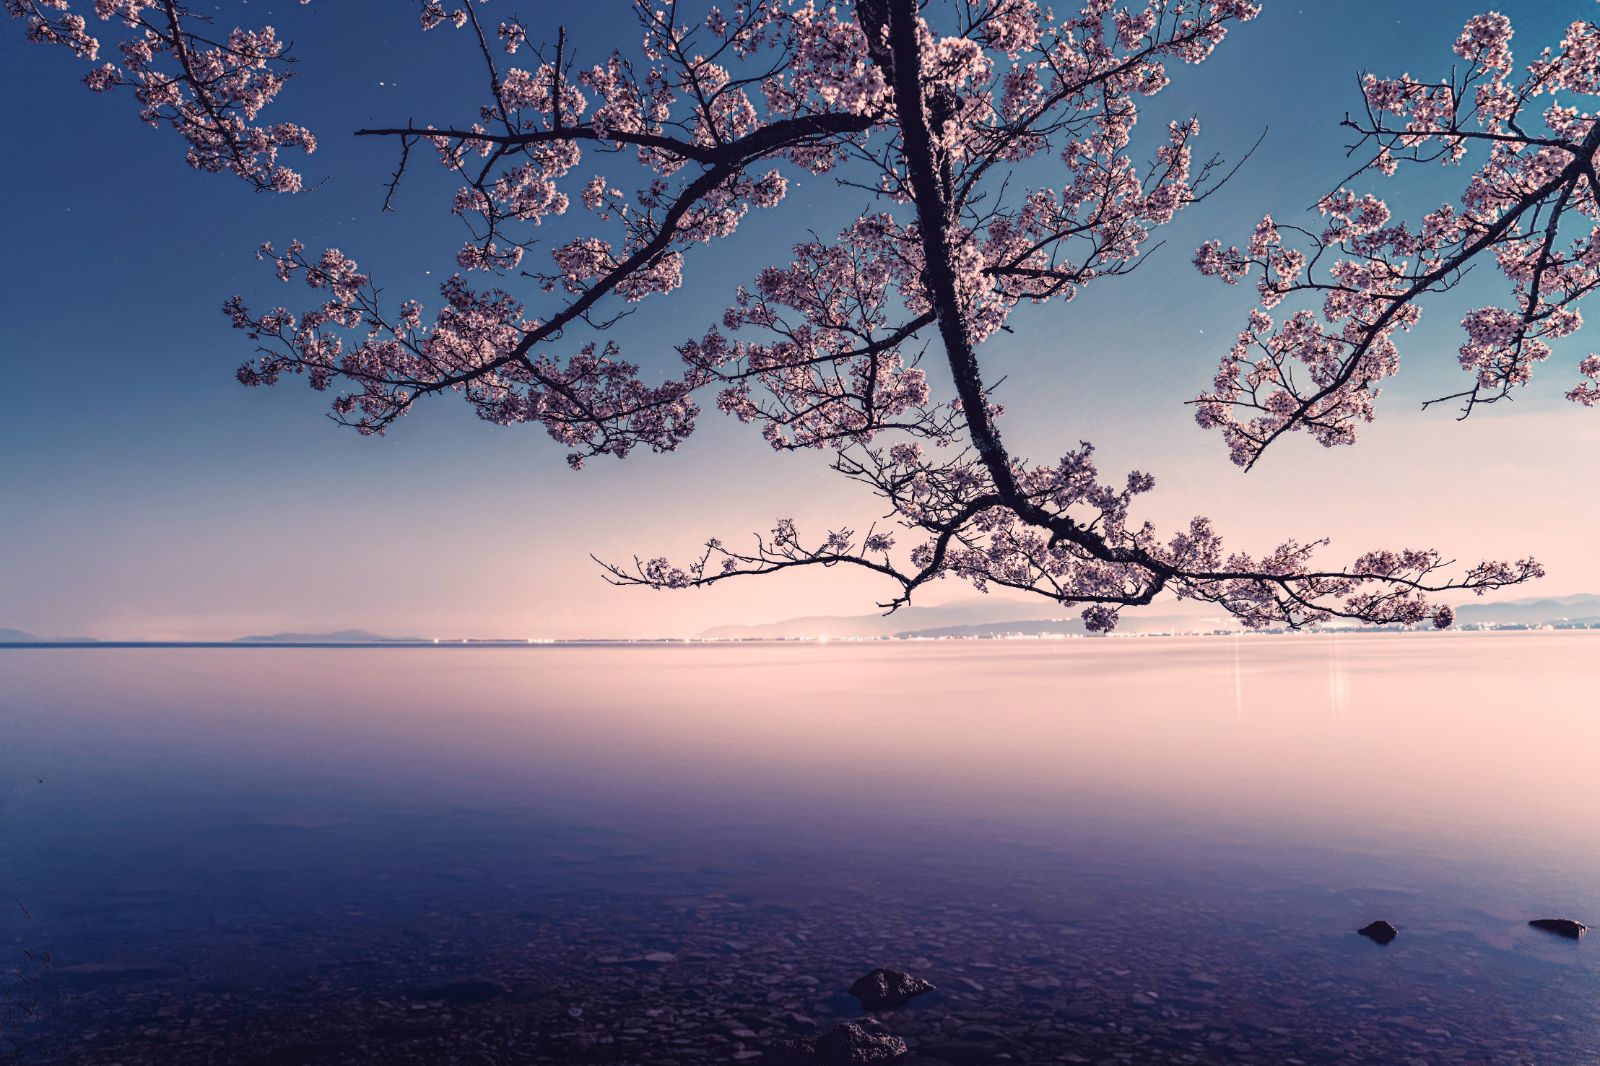 A cherry blossom branch over a lake in Japan